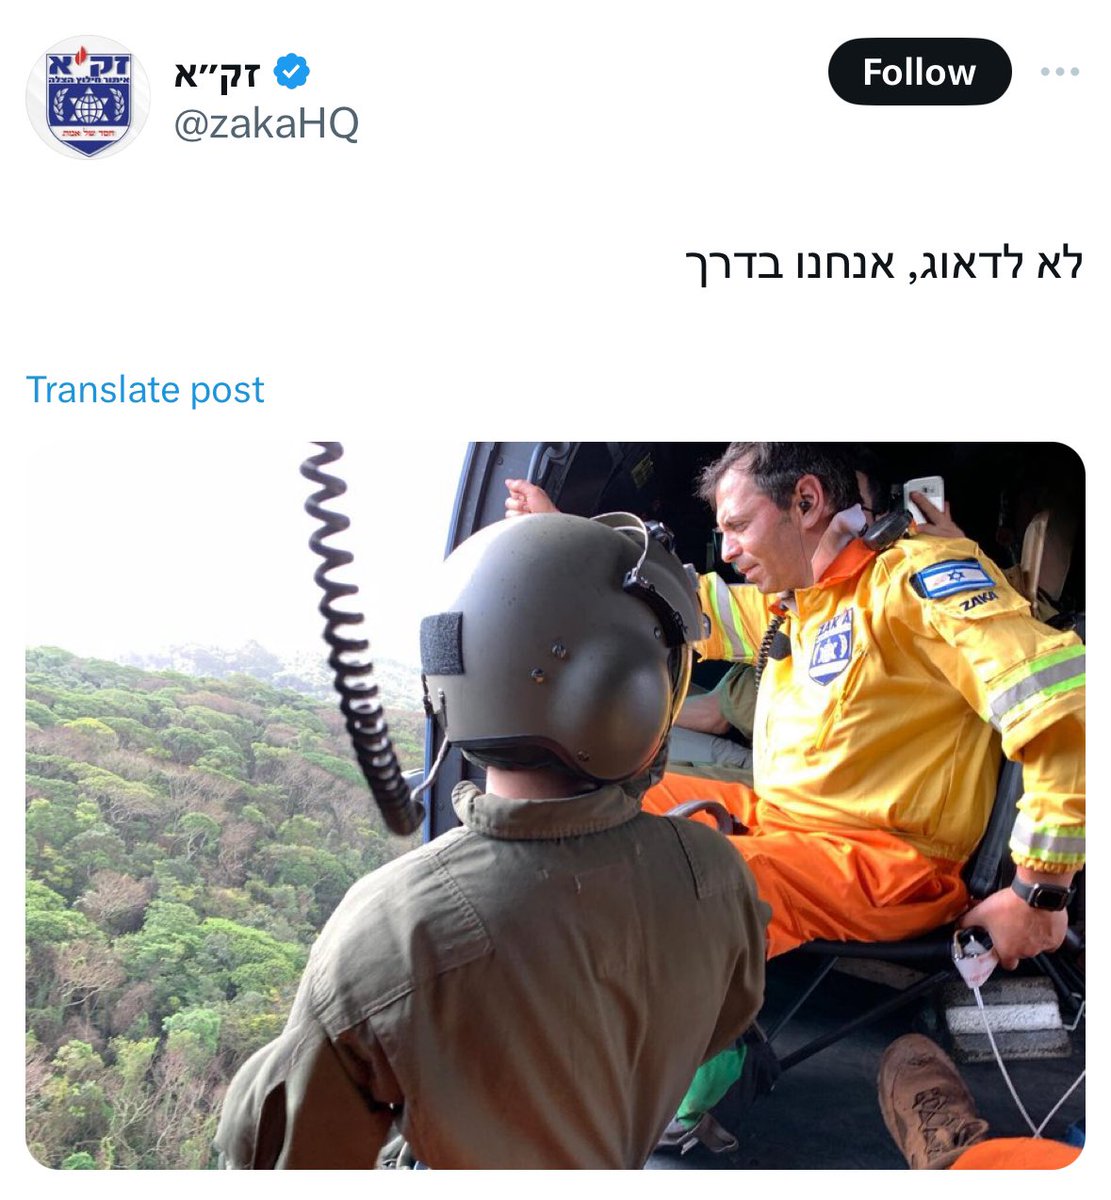 Israel’s rescue teams at Zaka trolling the Islamic Republic: “Don’t worry, we are on the way” Well done @zakaHQ